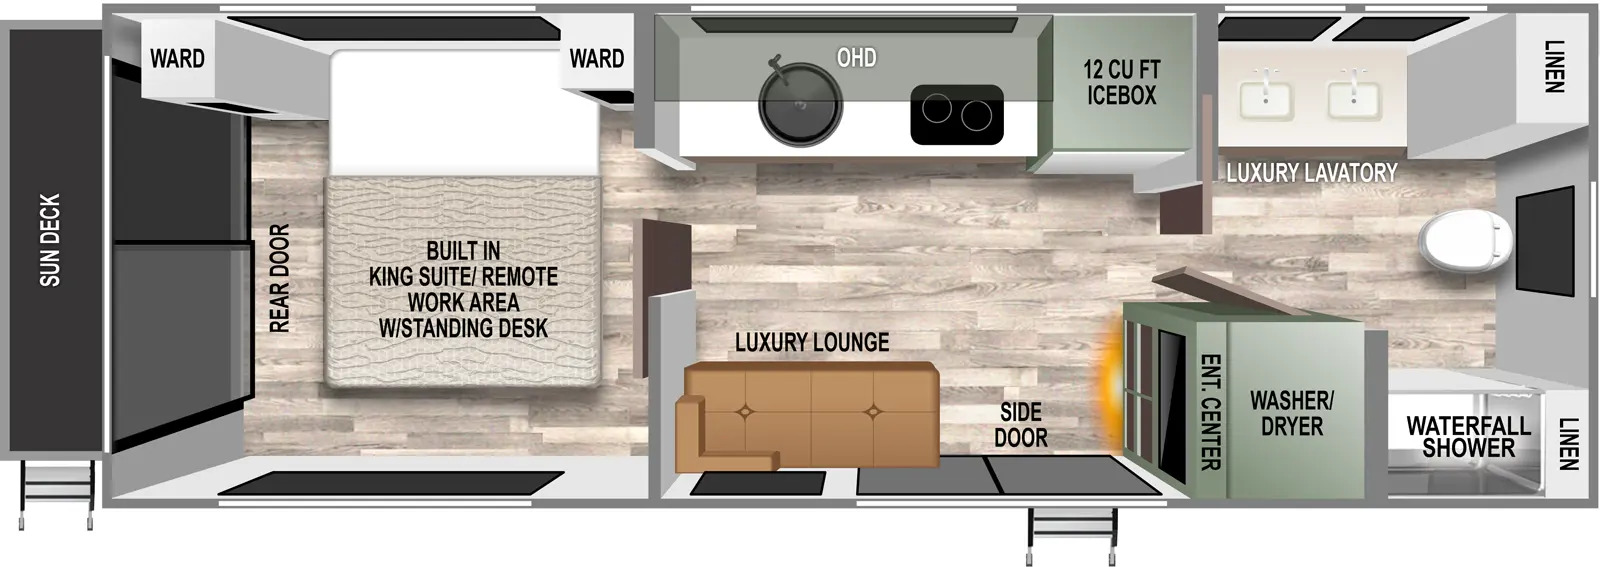 floorplan for Forest River IBEX RV Suite RVS1